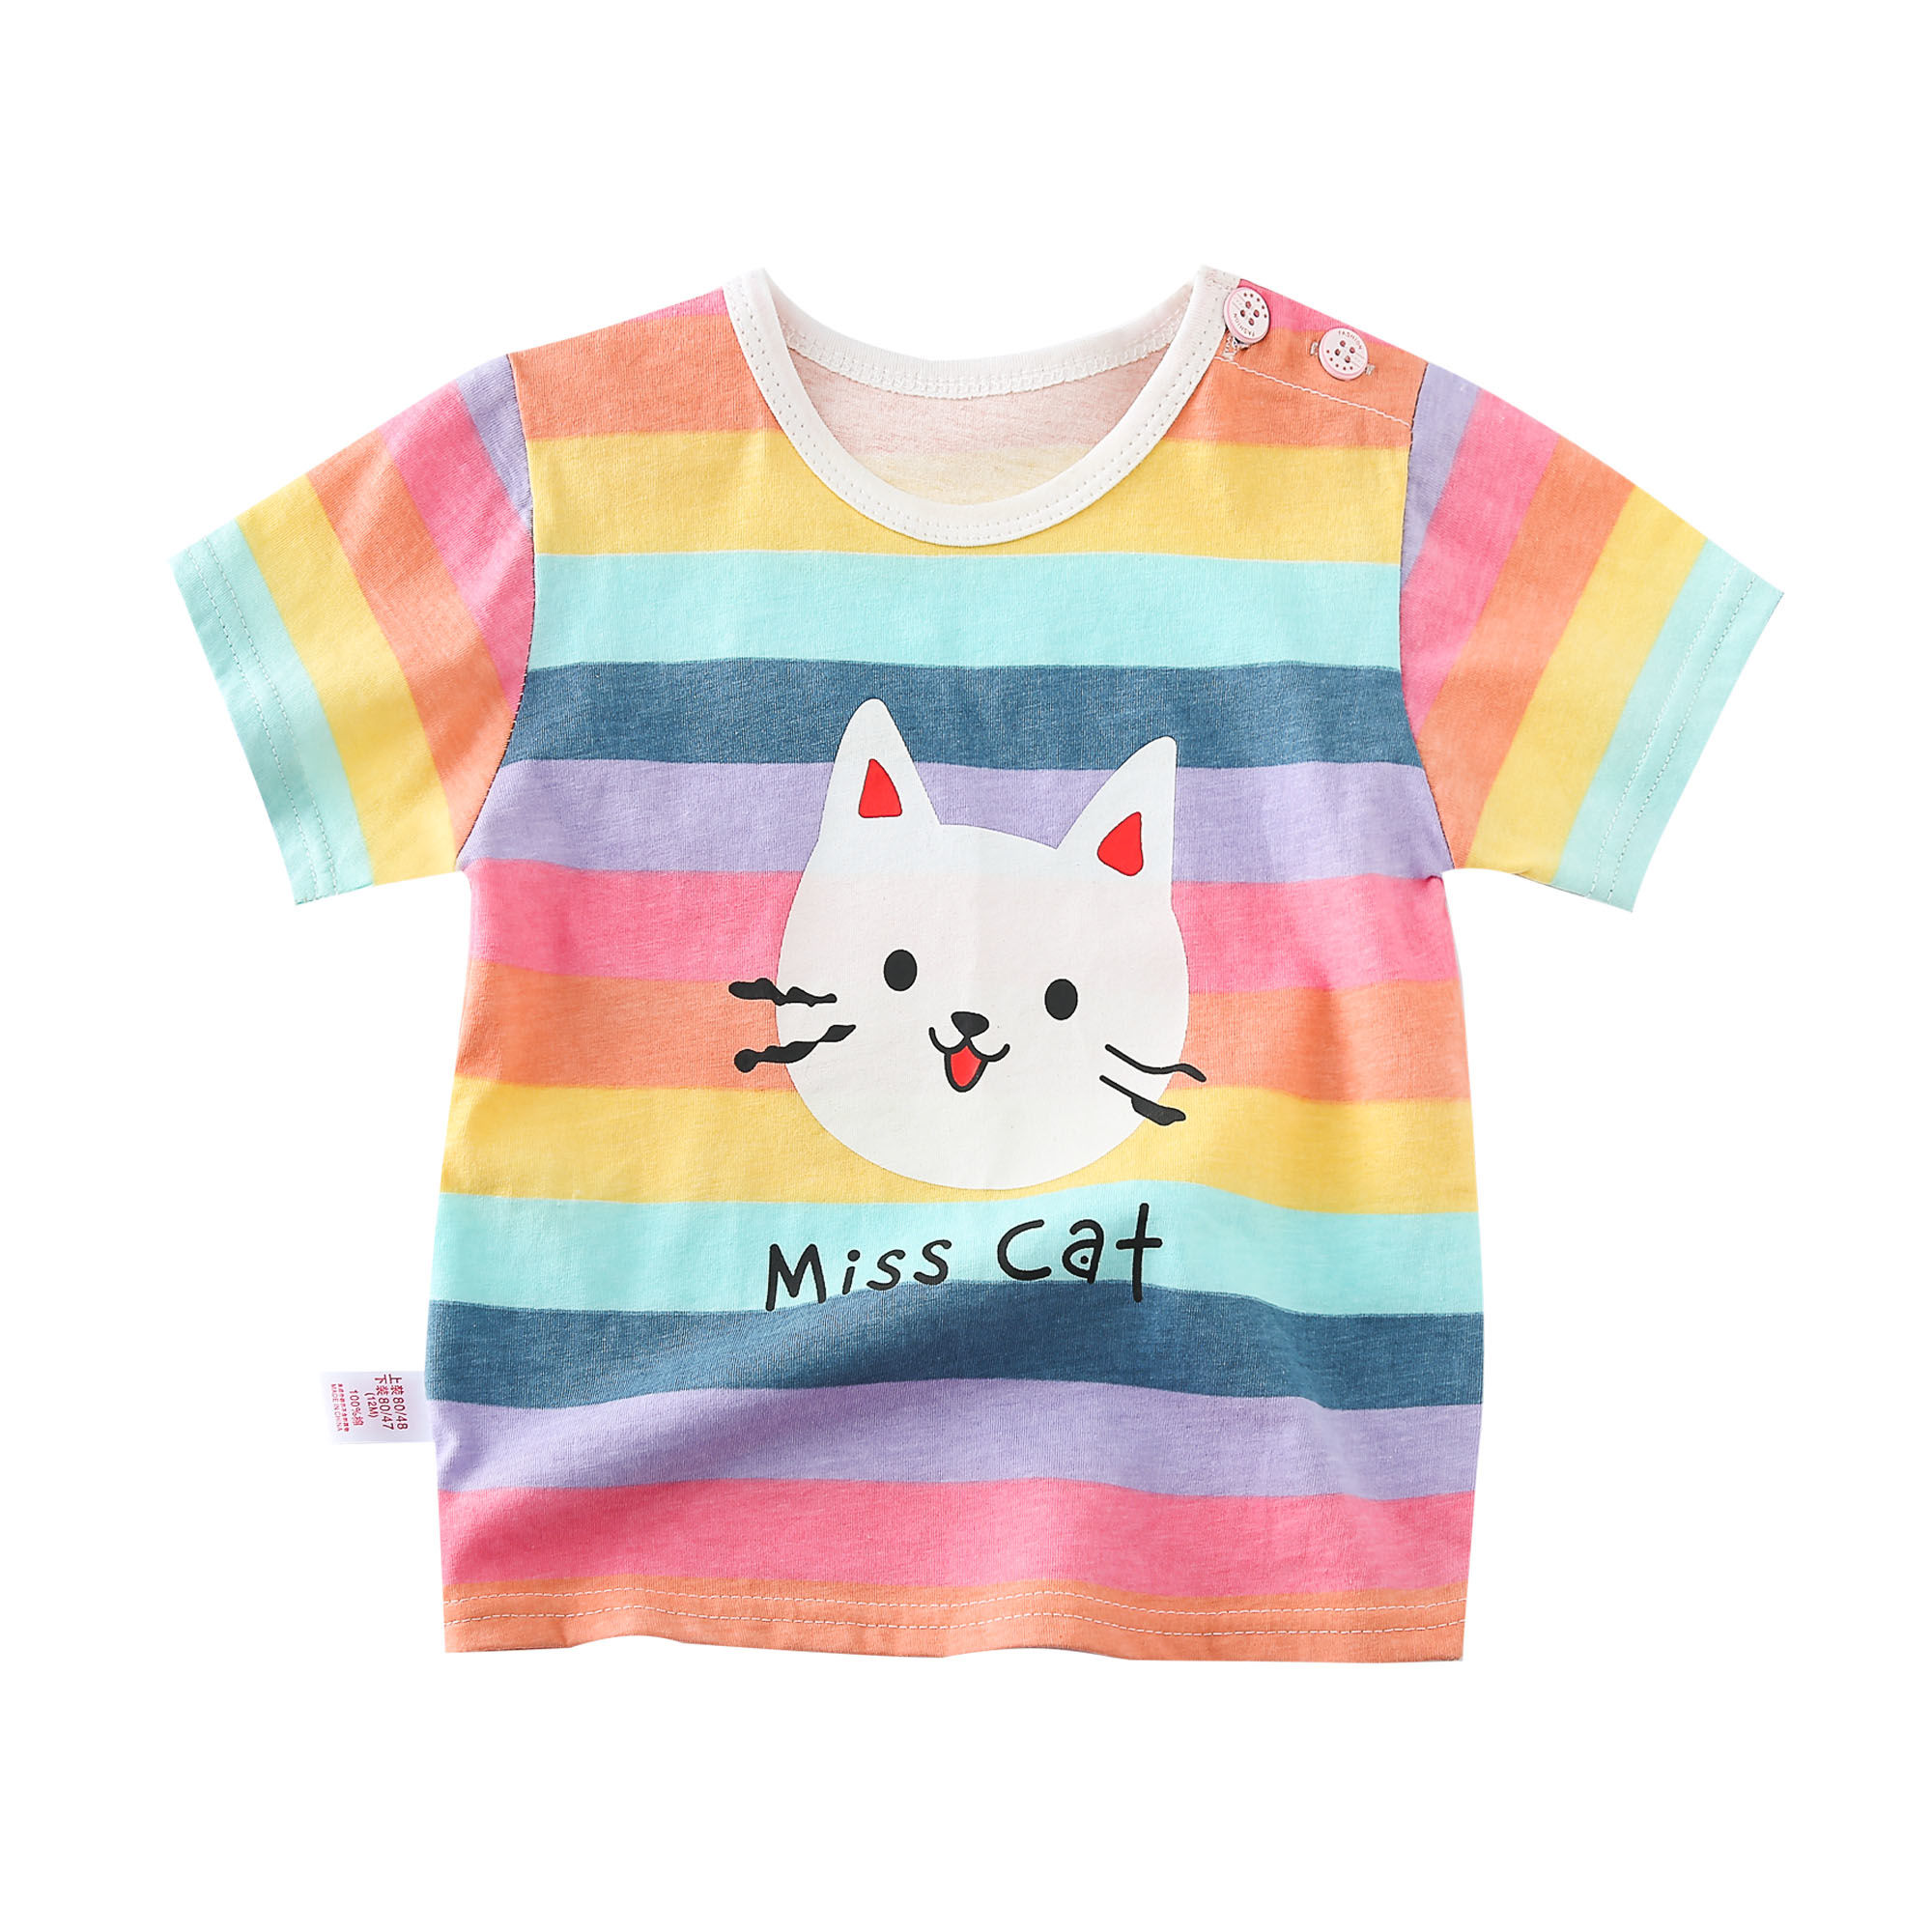 100% cotton tee for girls | rainbow tee with cat | miss cat t-shirt